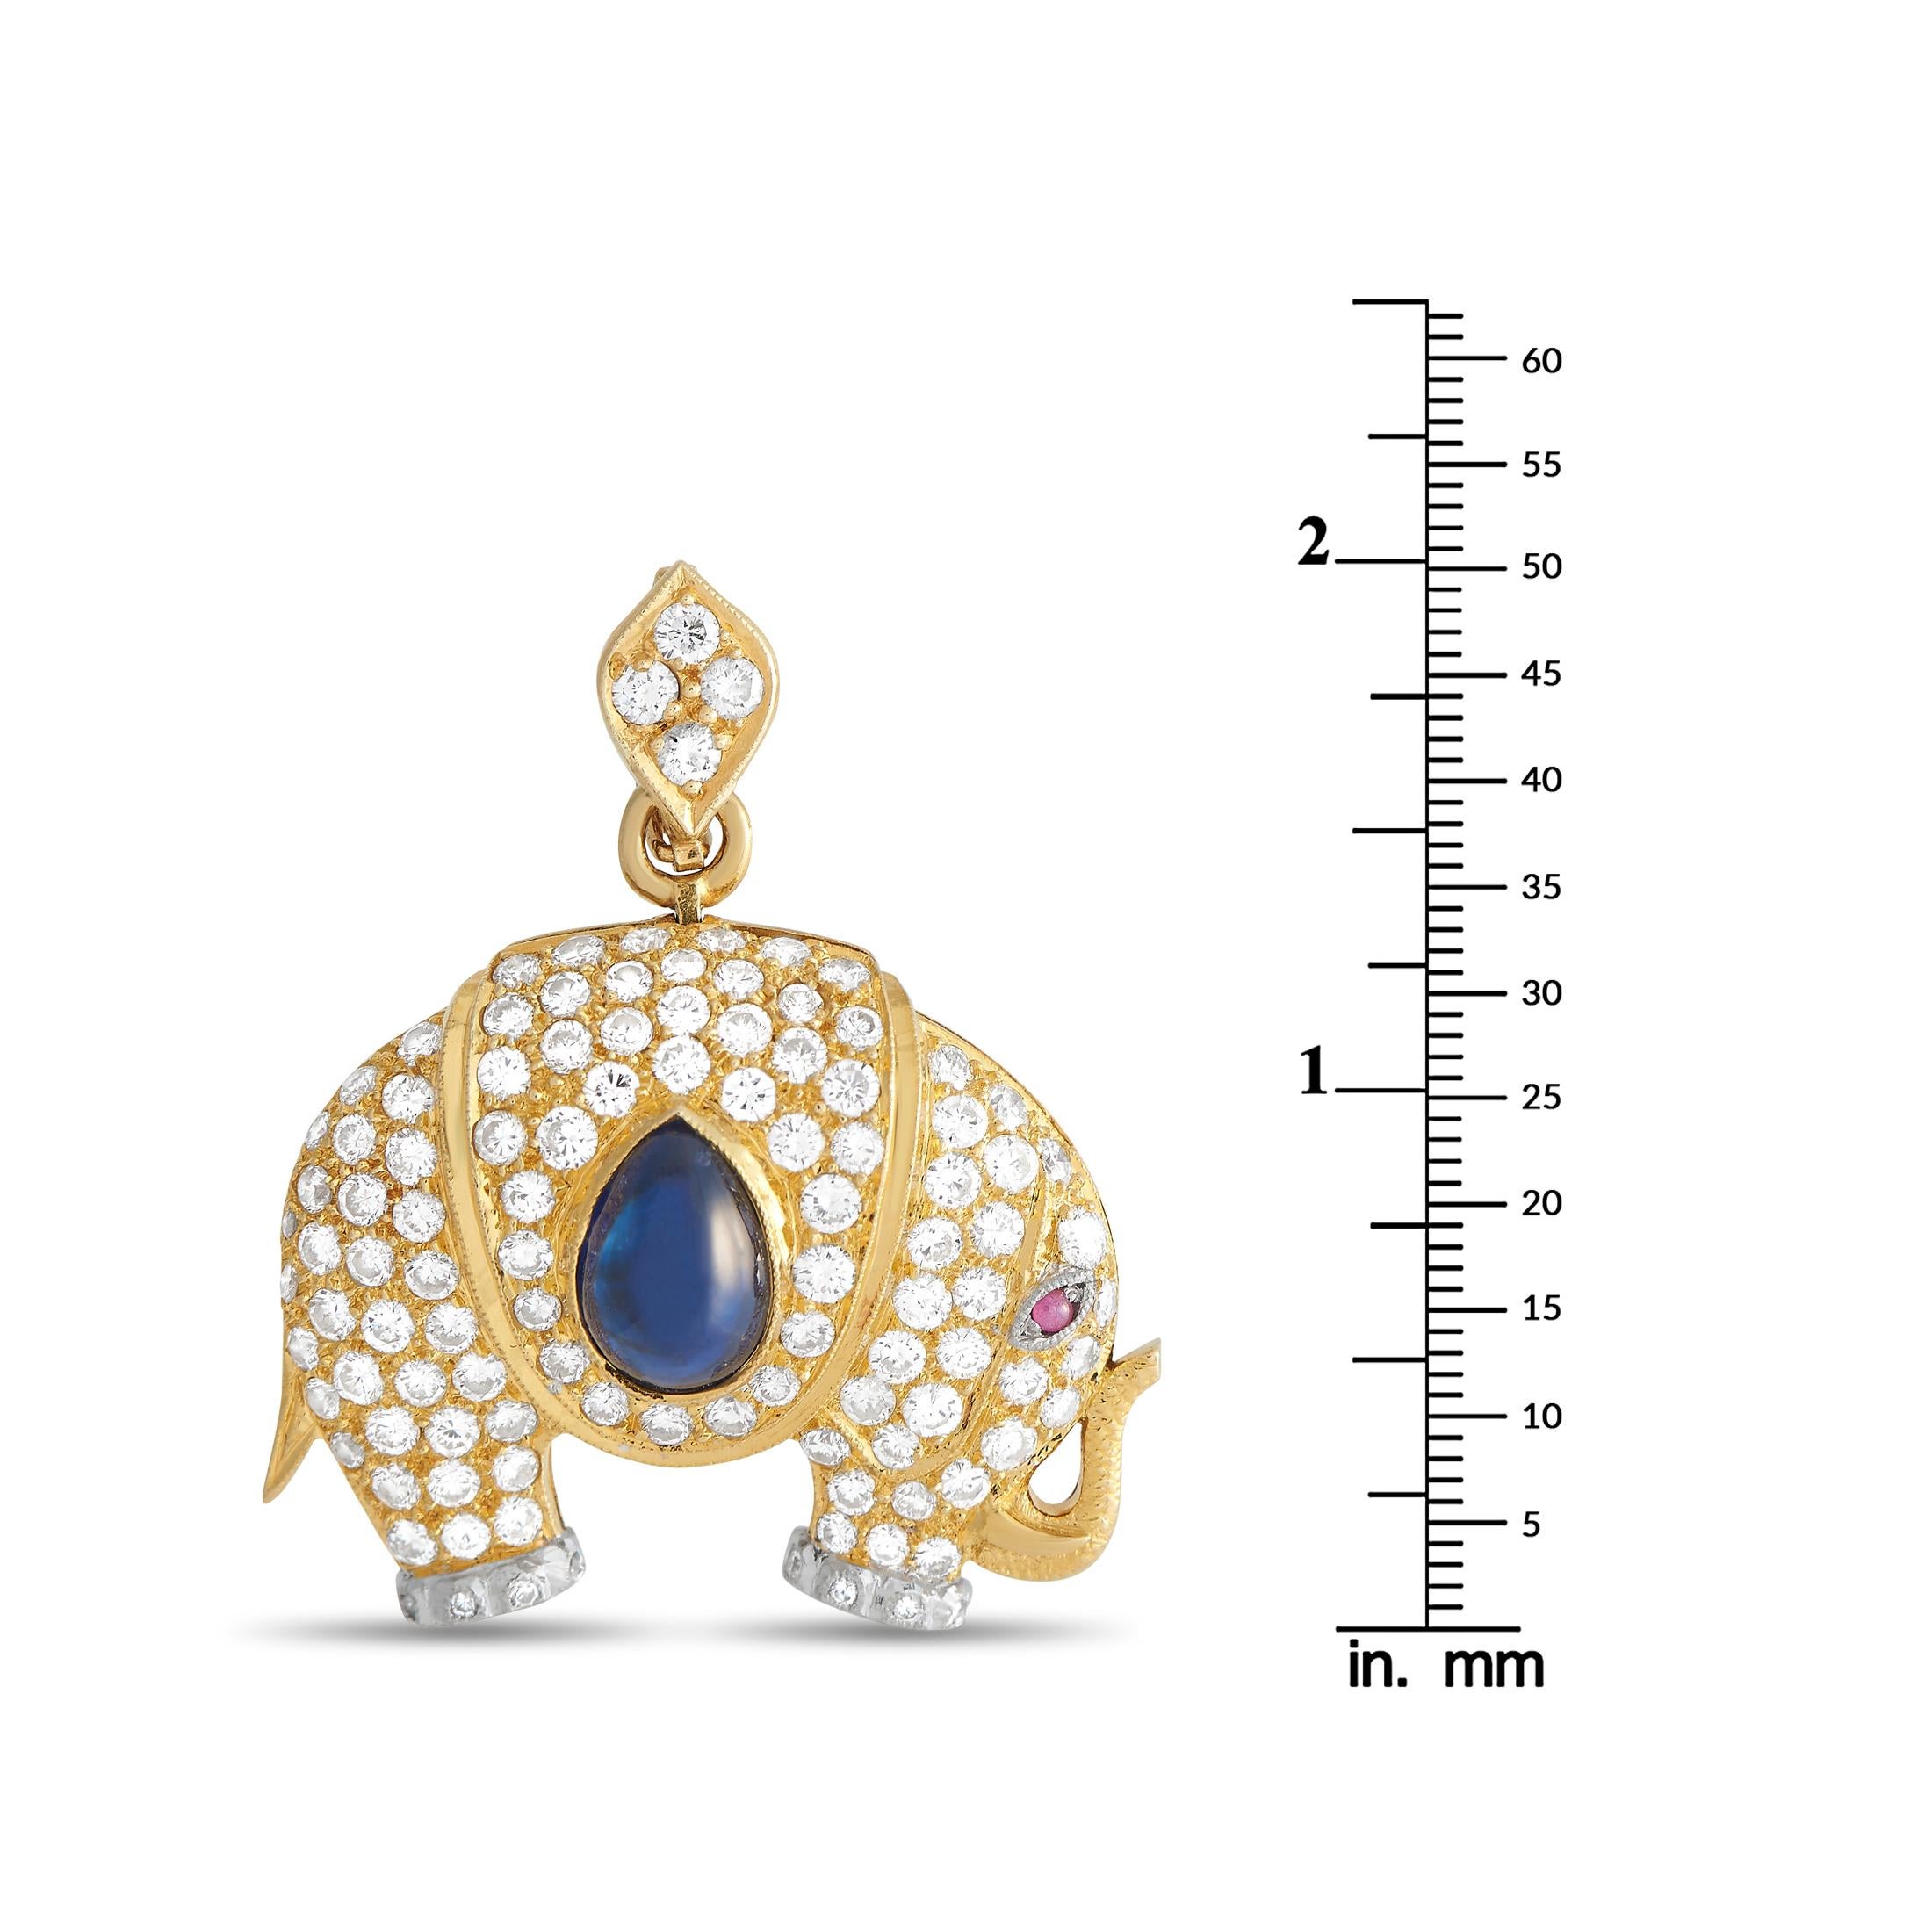 Mixed Cut LB Exclusive 18k Yellow Gold 1.50ct Diamond and Sapphire Elephant Pendant Brooch